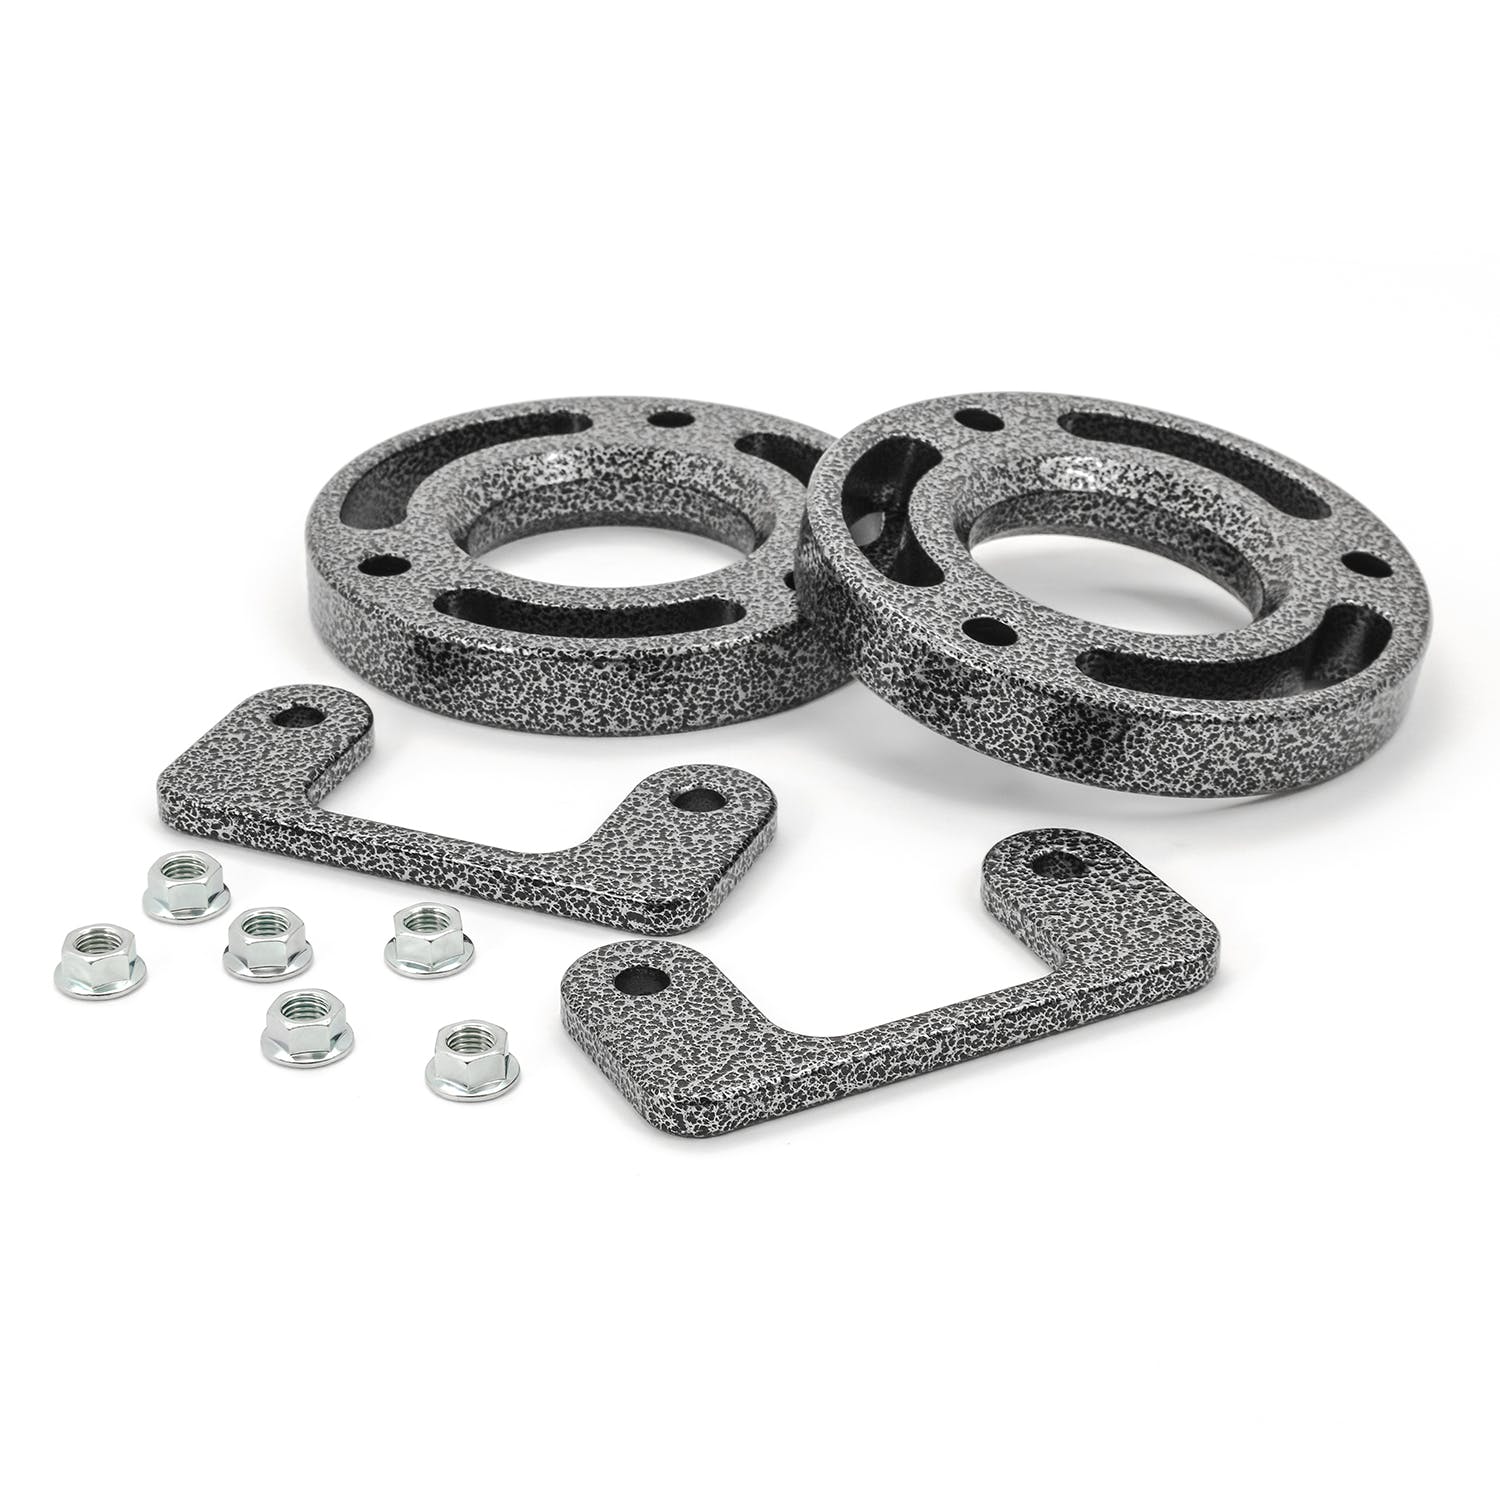 Rugged Off Road 9-102 Suspension Leveling Kit